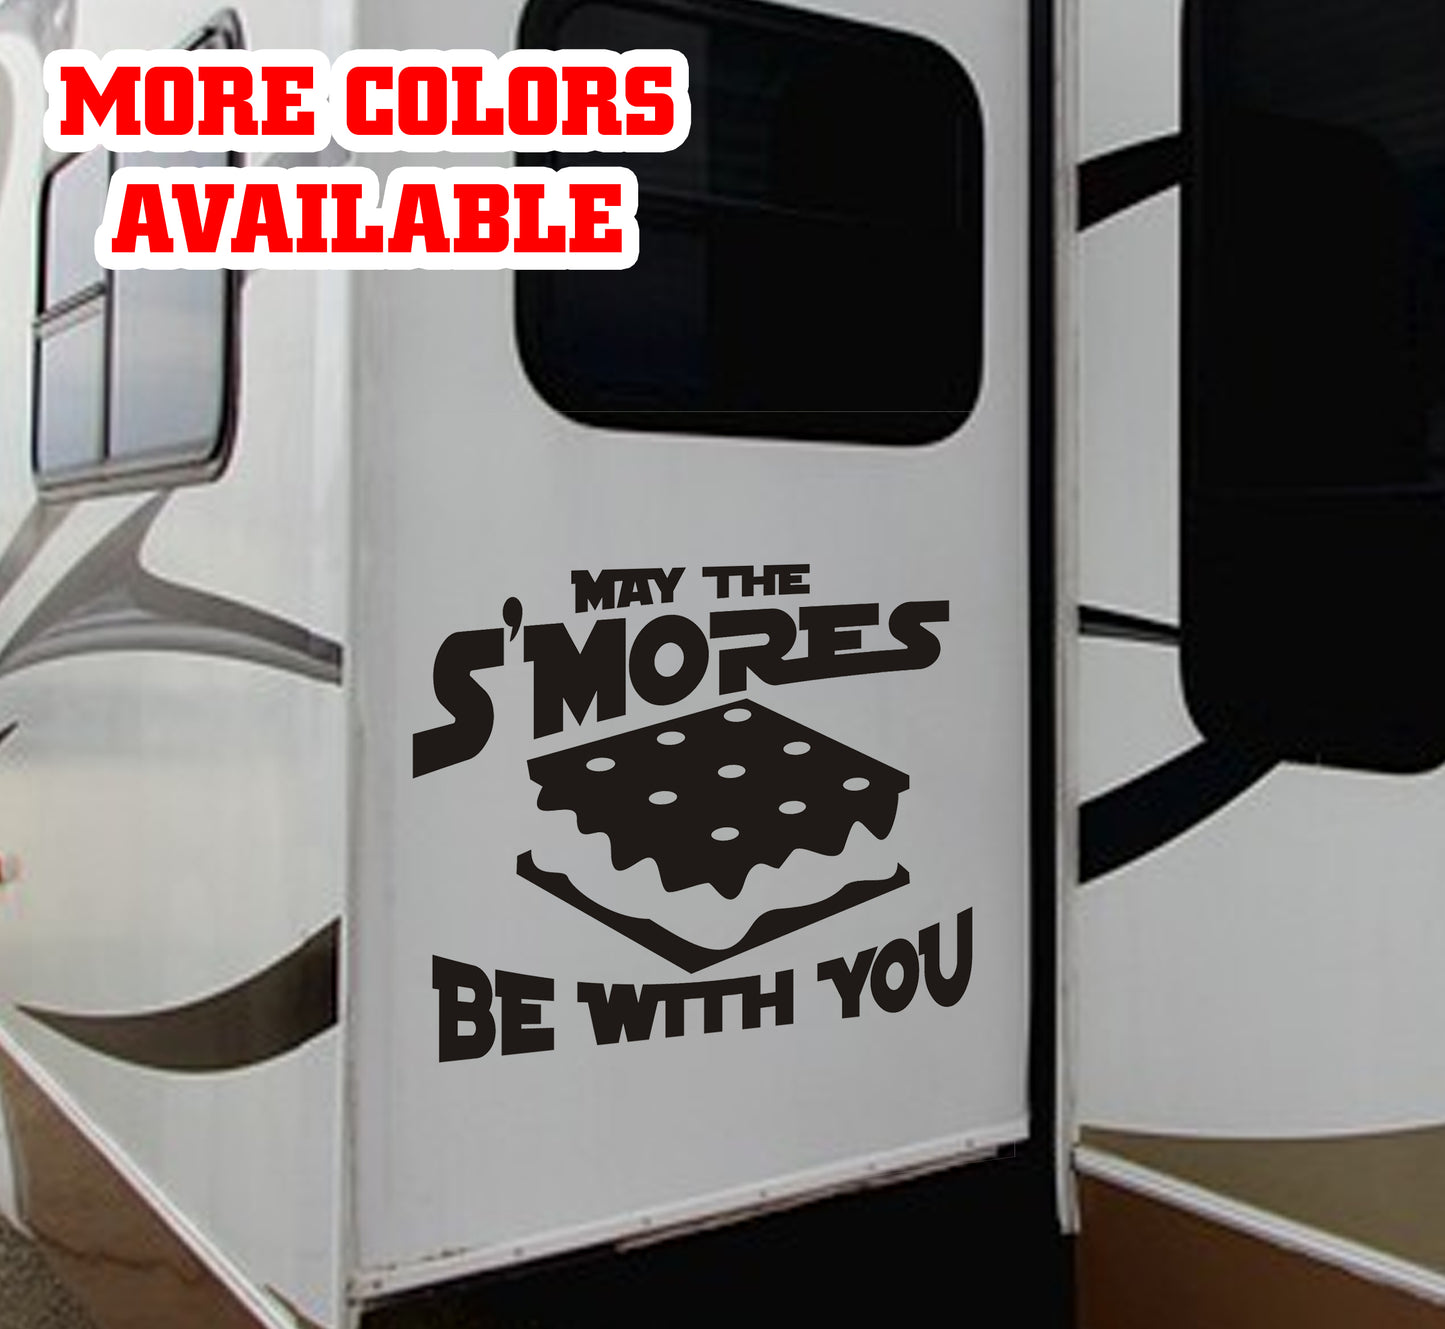 May the Smores be with you RV slide out large vinyl Decal Graphic kit funny camping S'mores